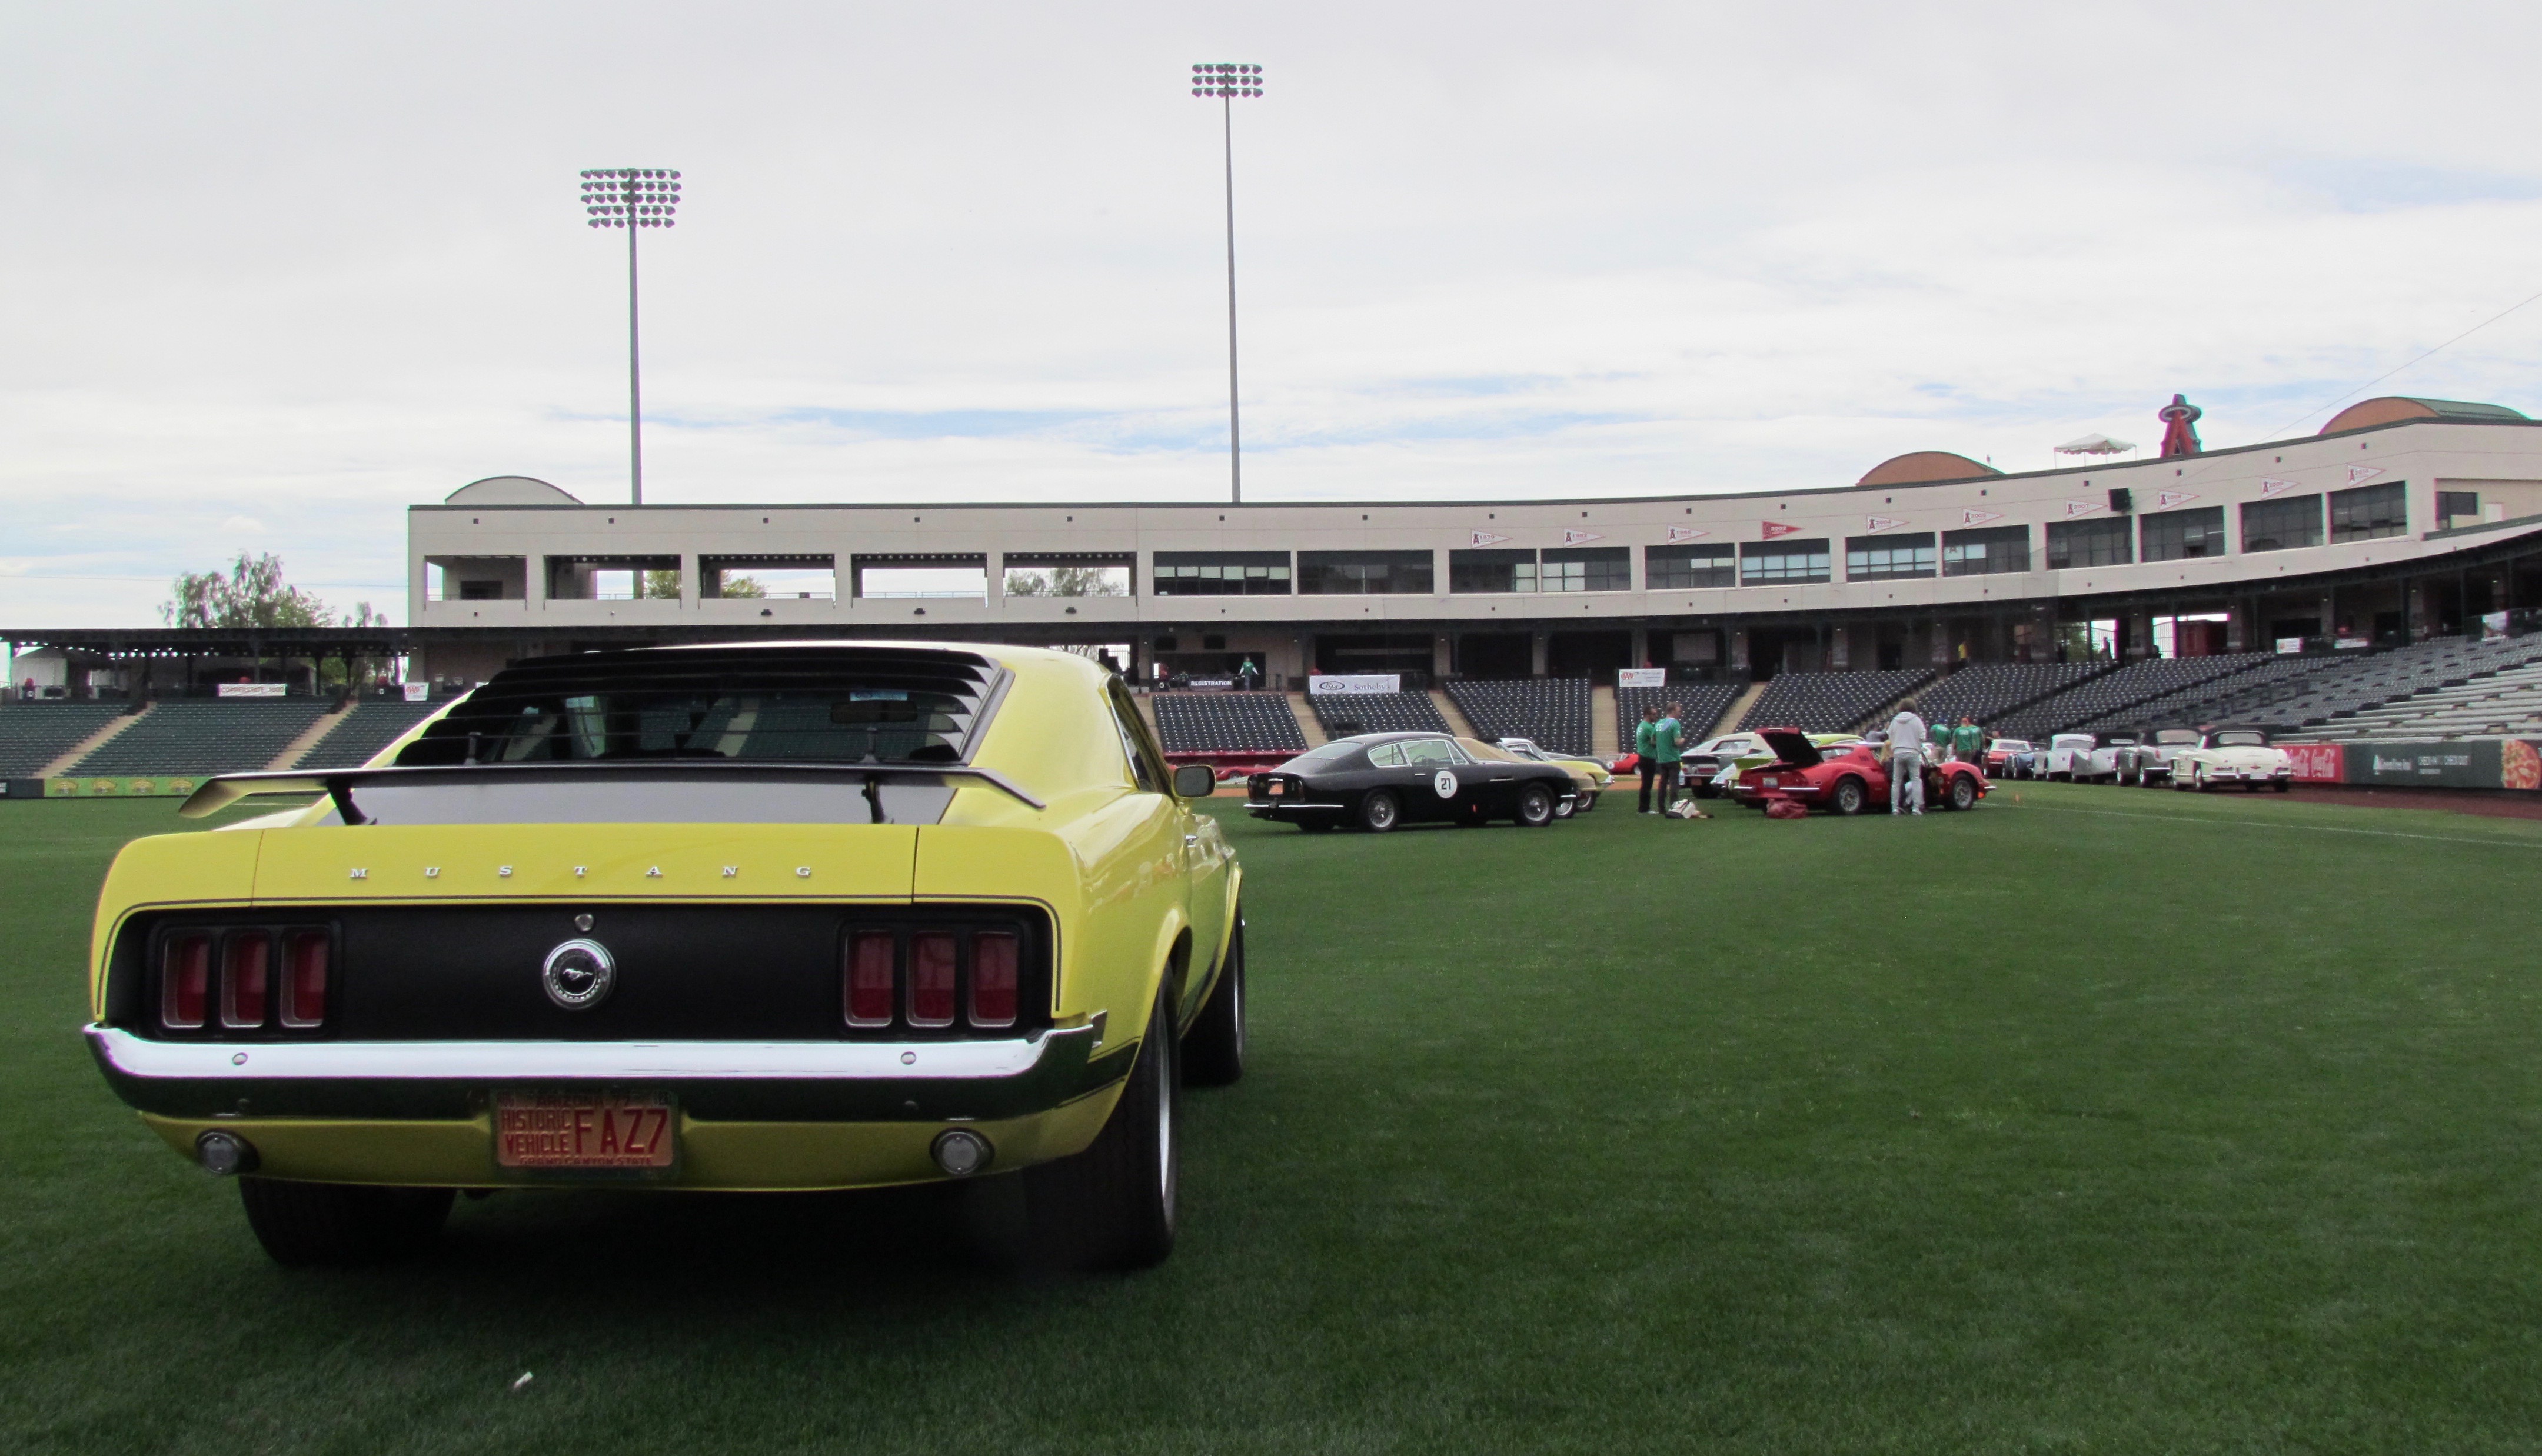 Cars on the baseball field: Passions united